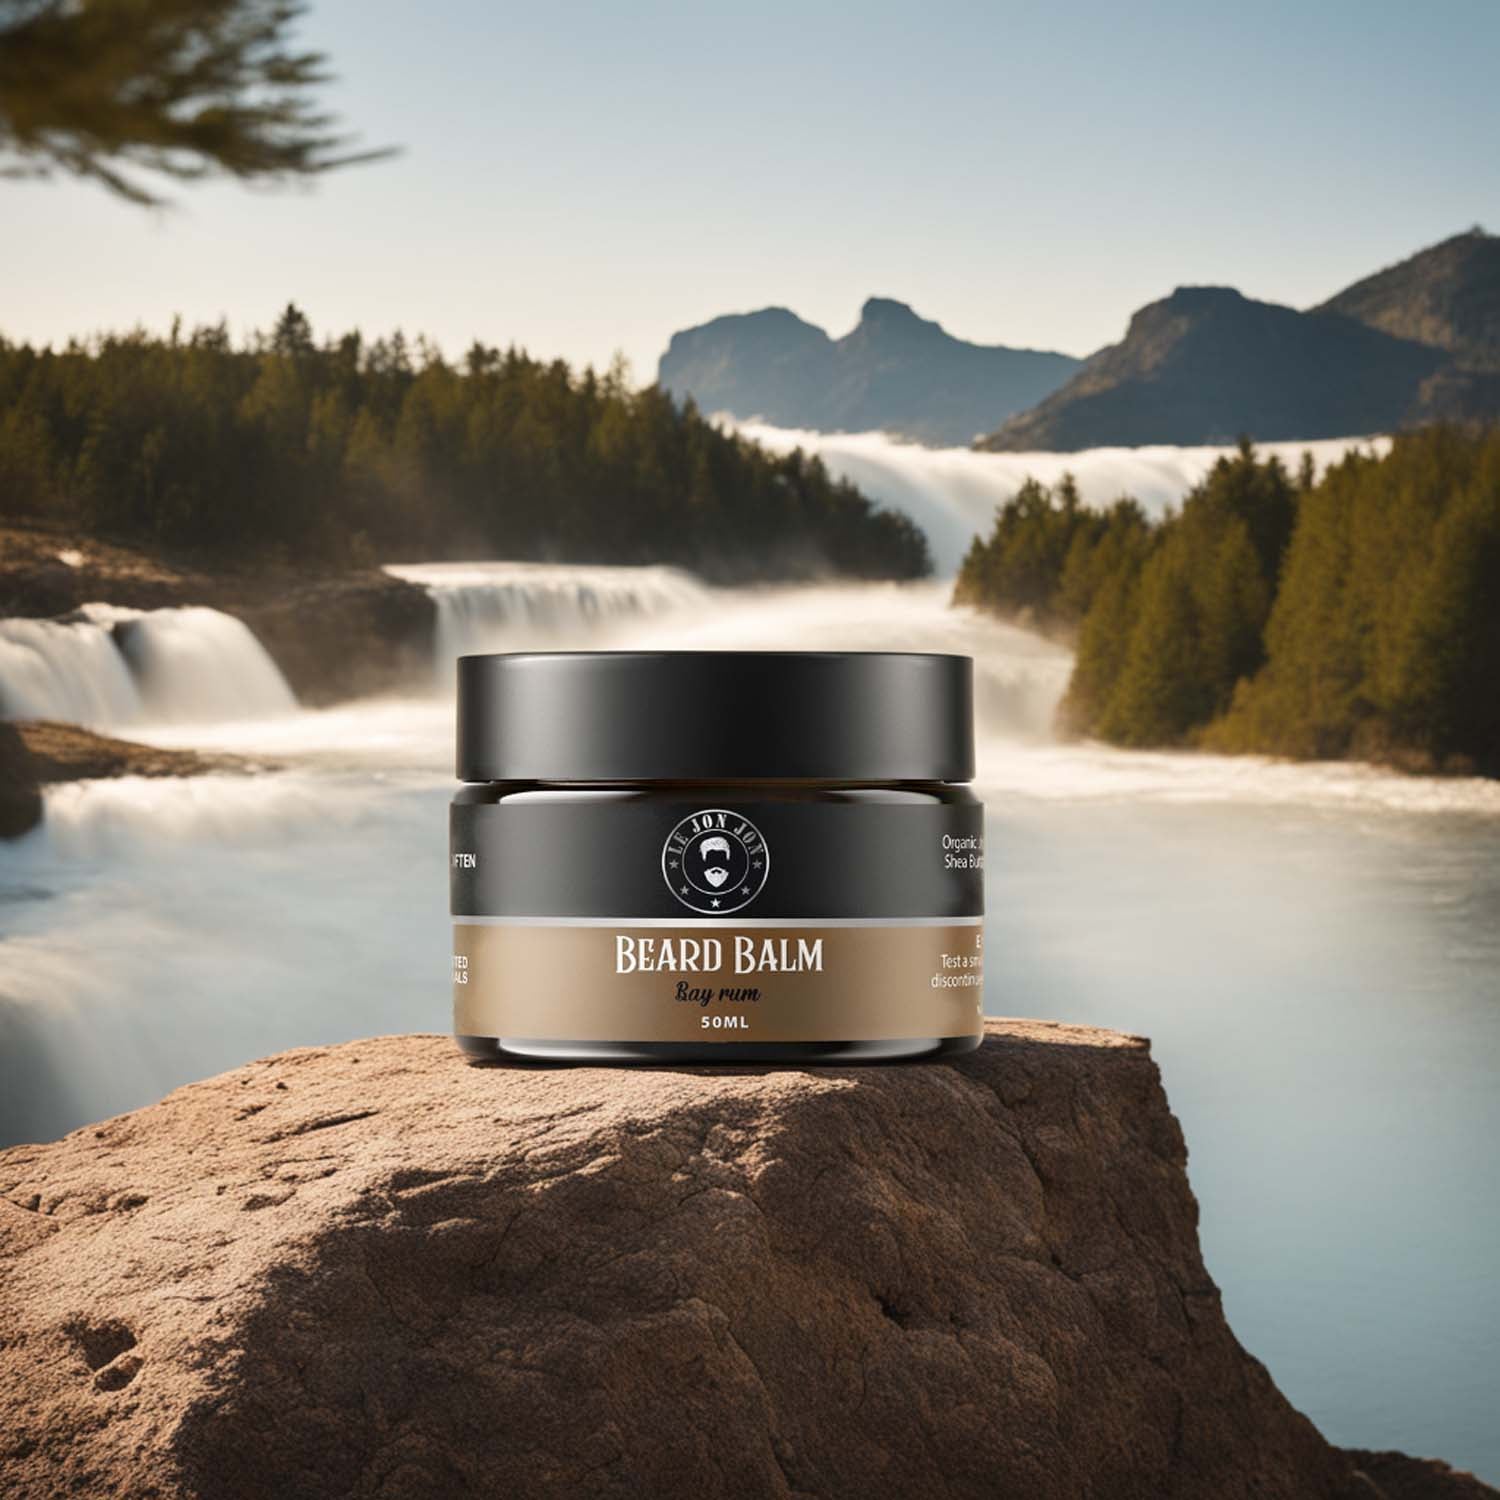 Beard balm in front of nature